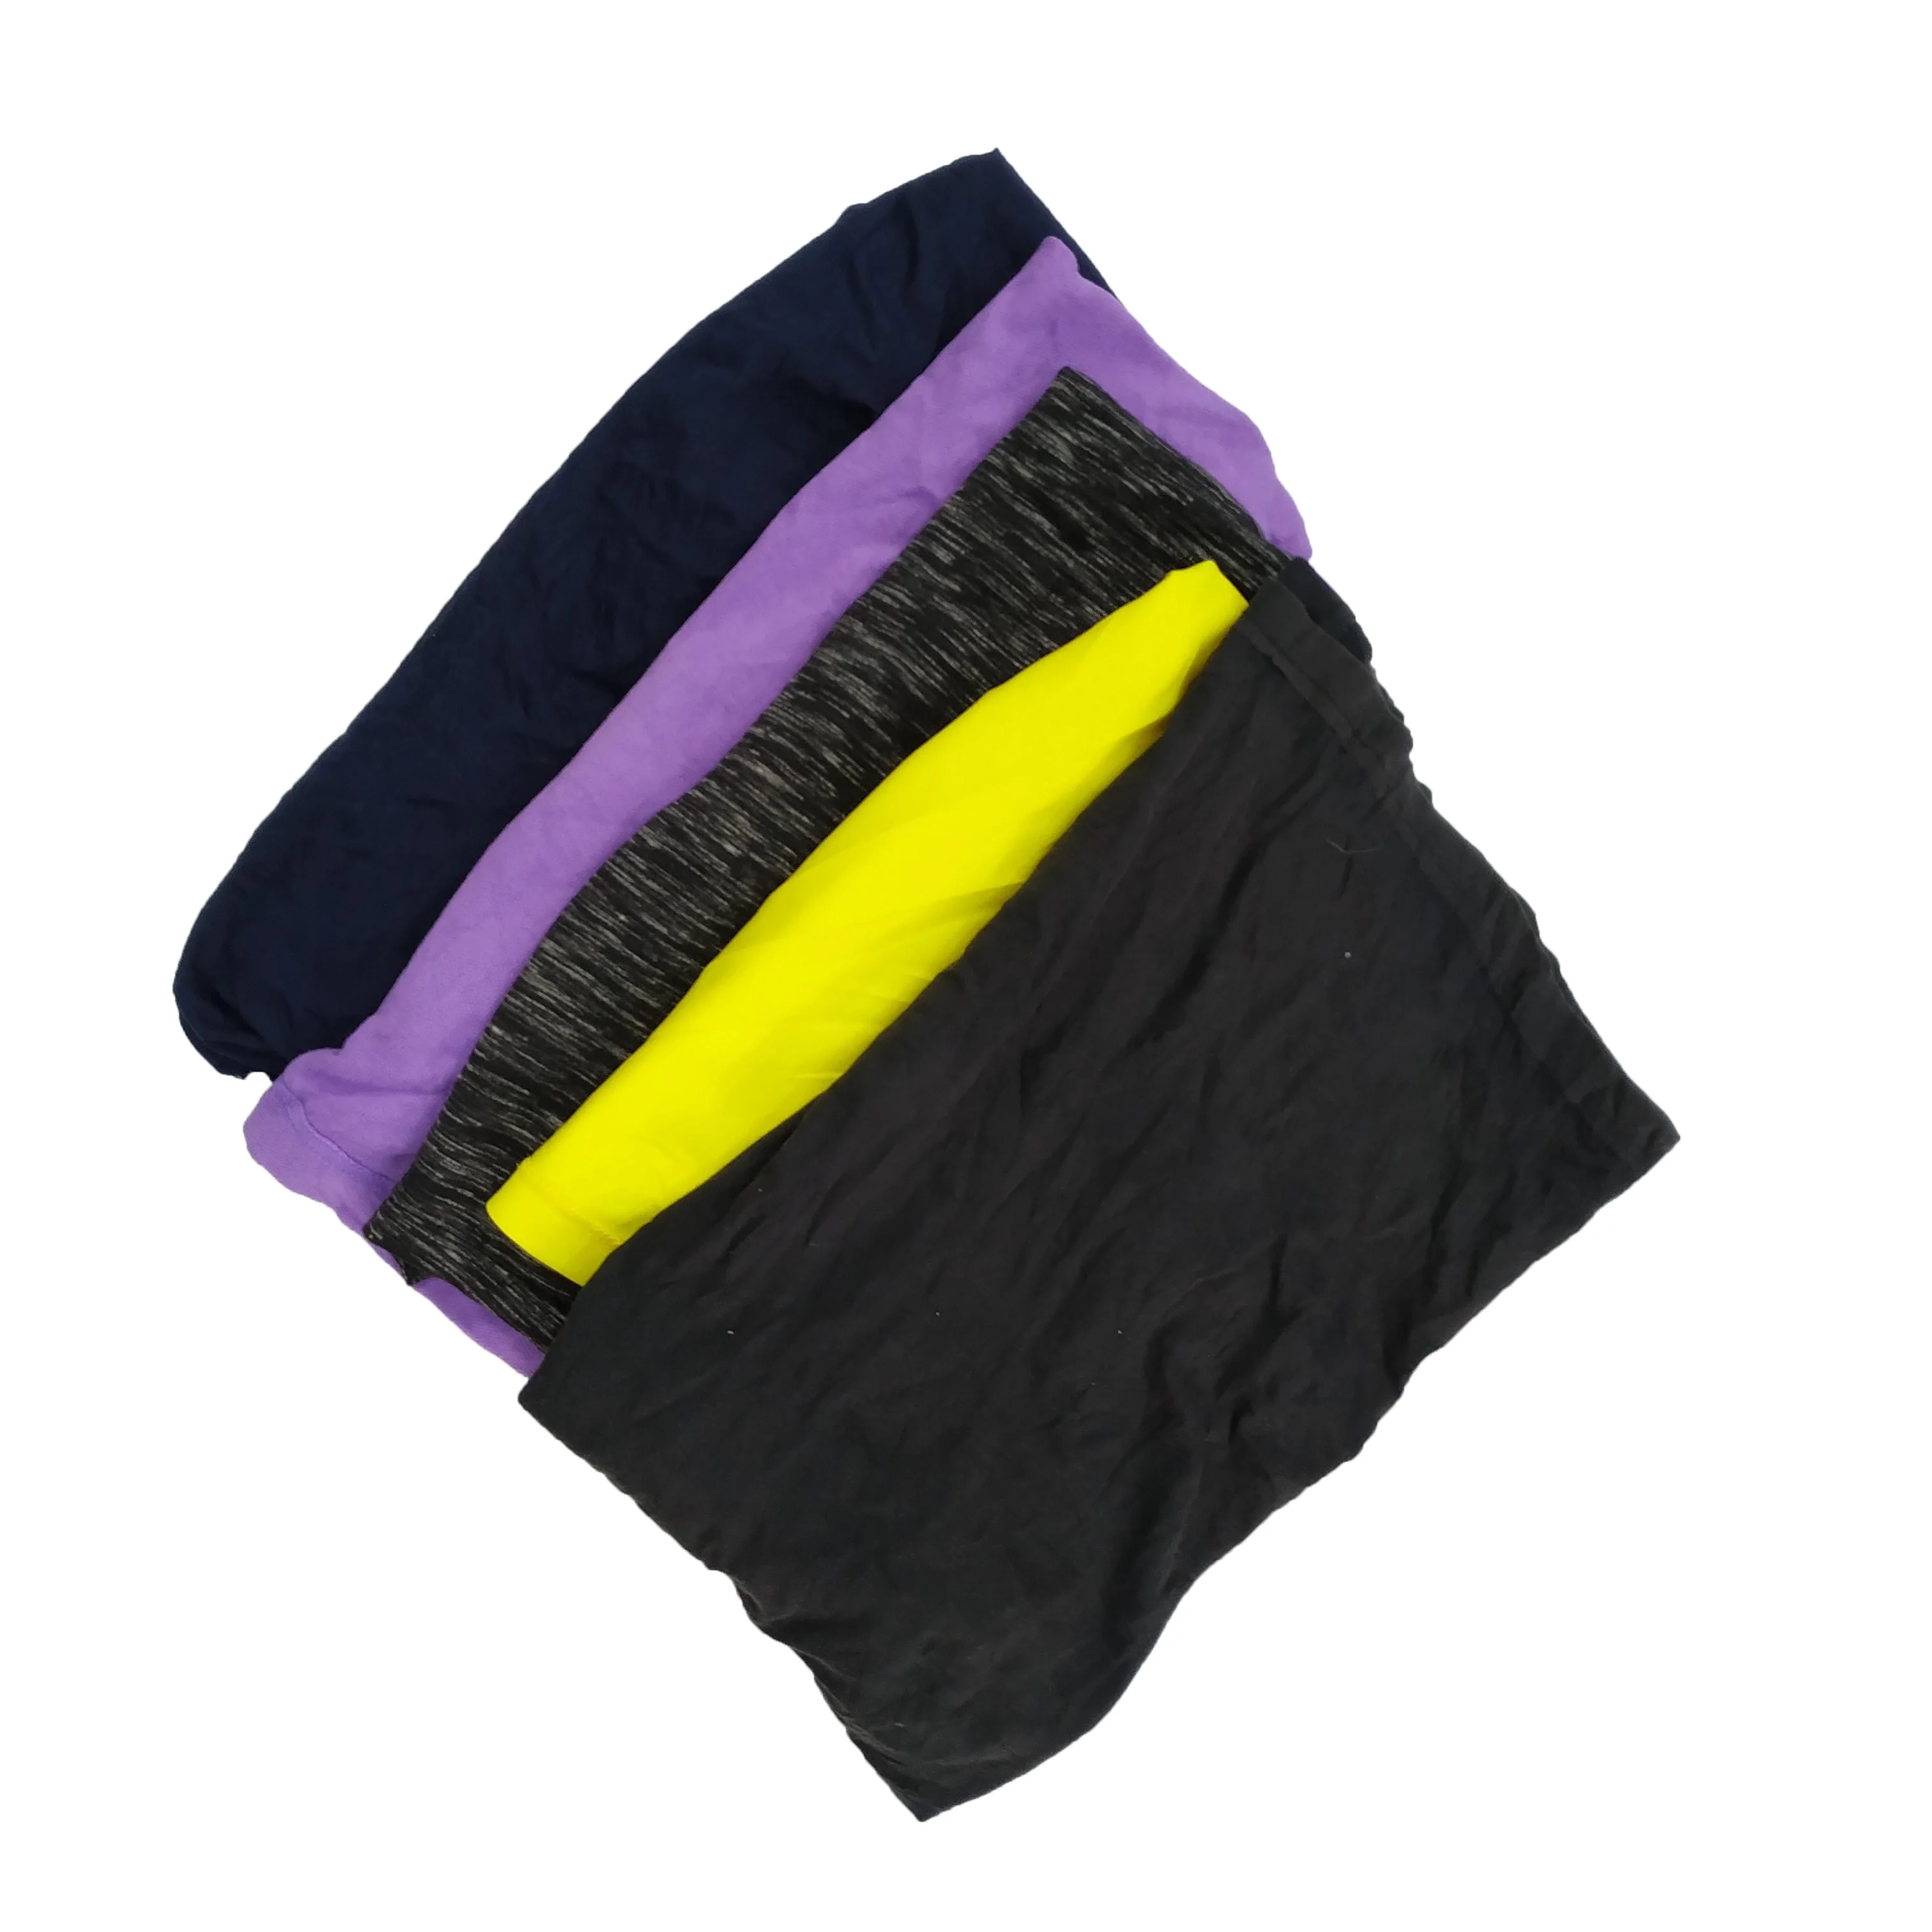 
Hot-selling 35-55cm dark color mixed t shirt second hand cloth cleaning wipes cotton rags 